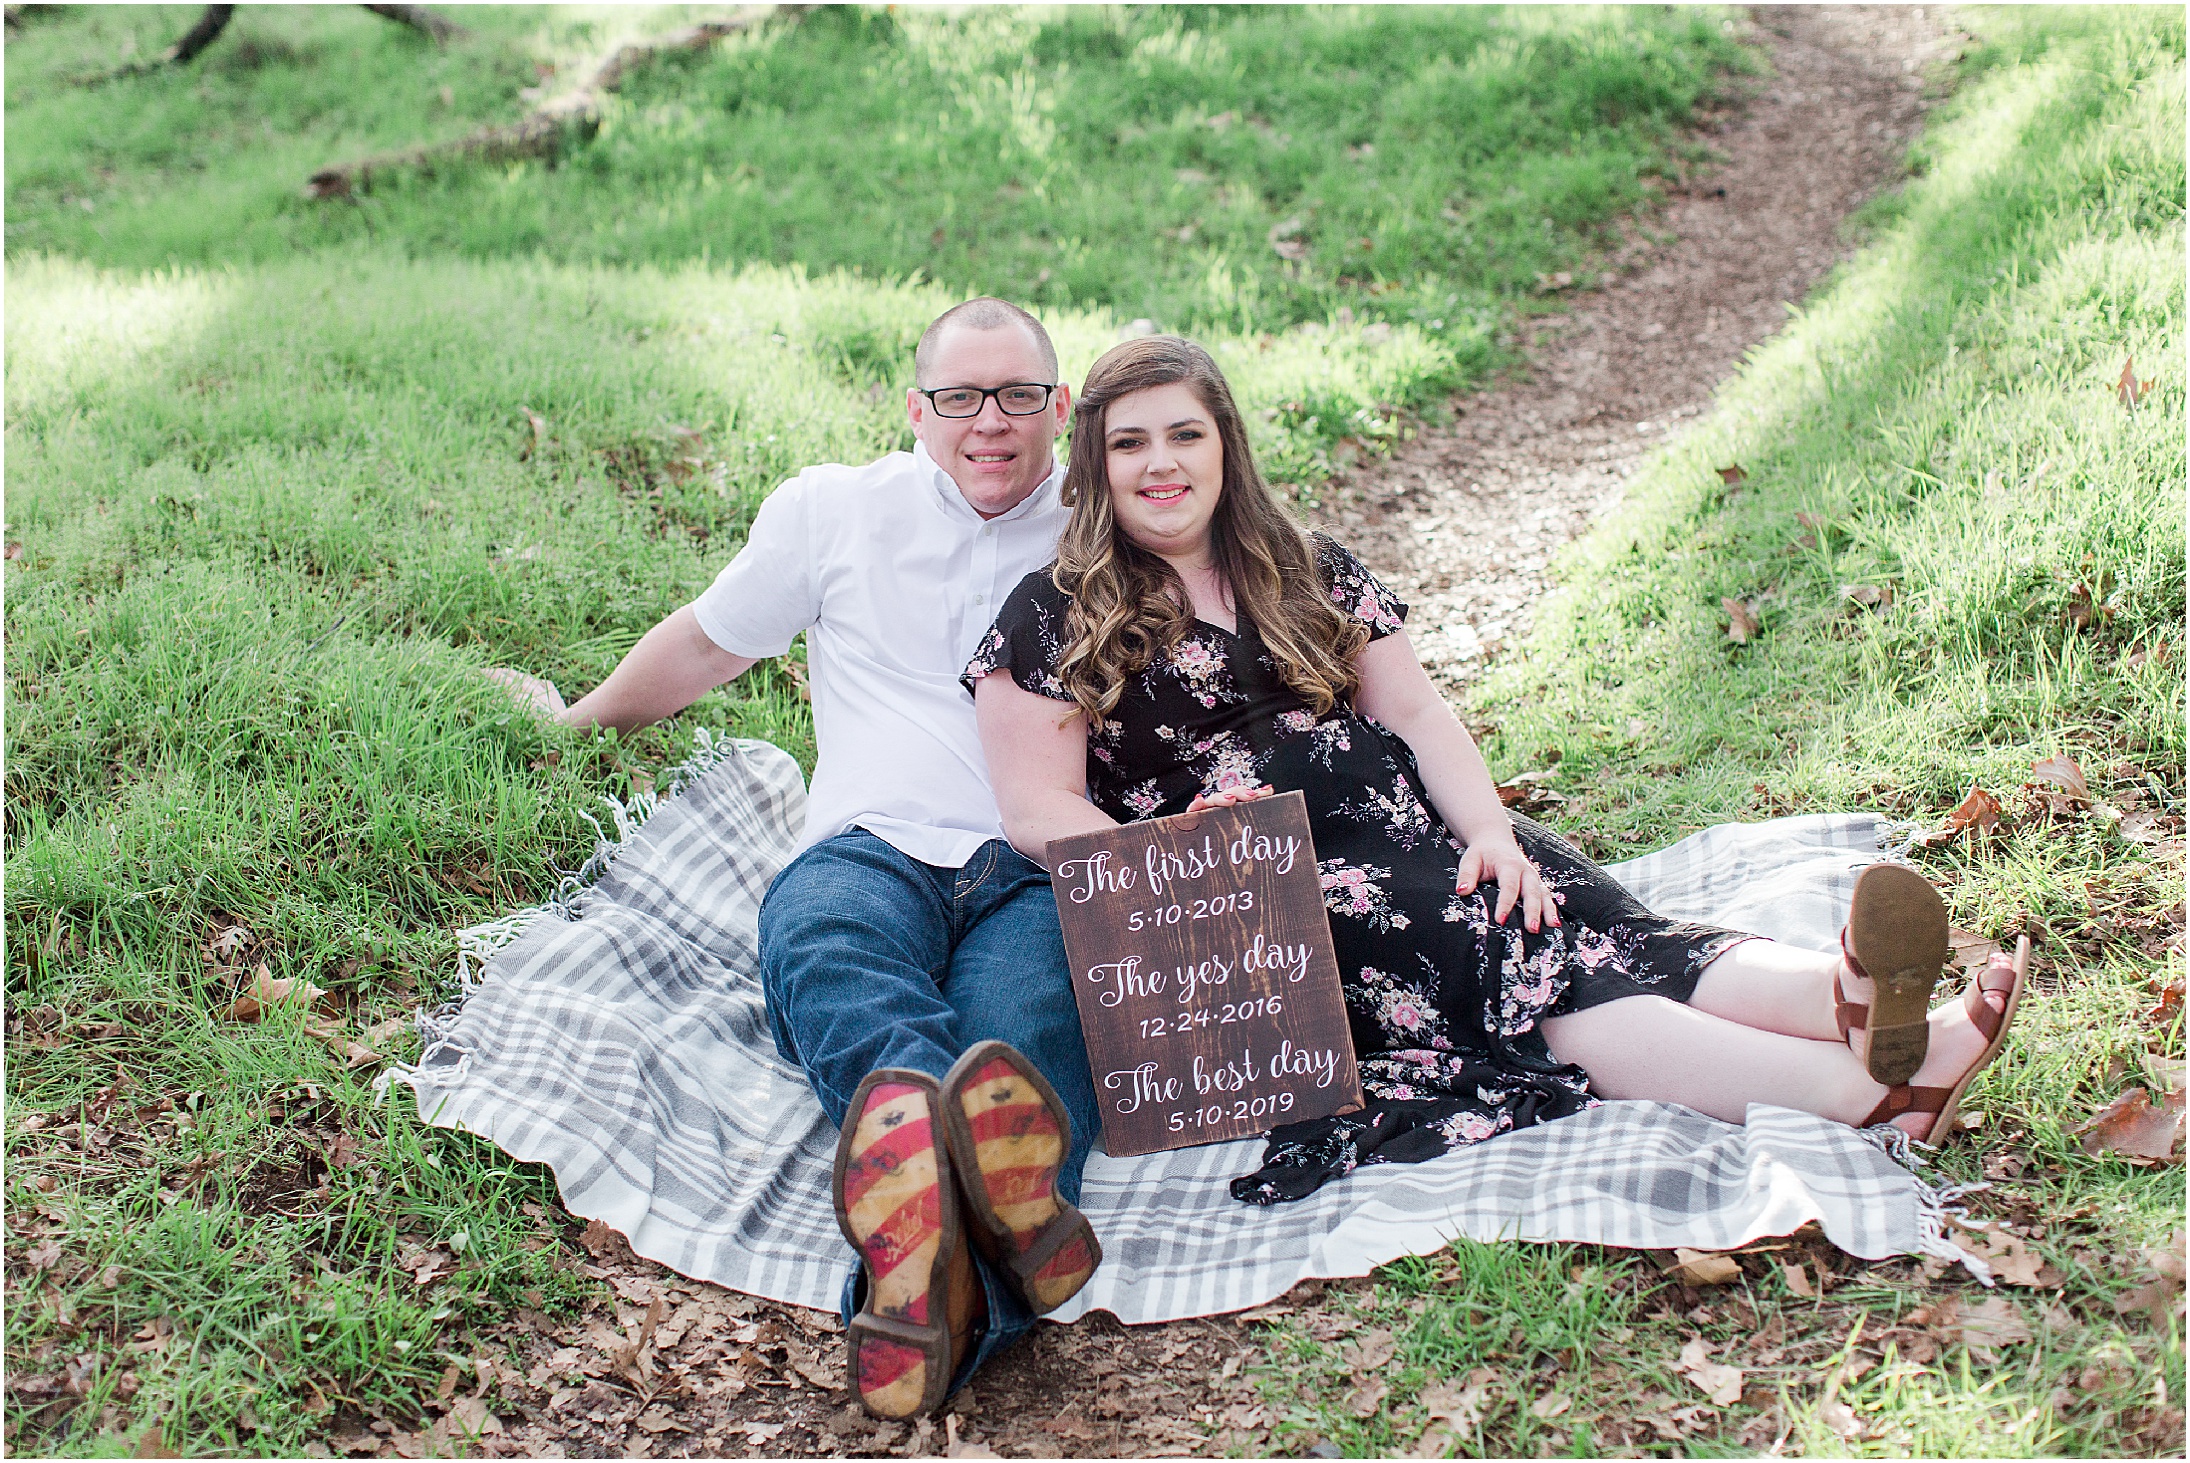 Bidwell Park Chico California Engagement First Date Said Yes Wedding Signs,